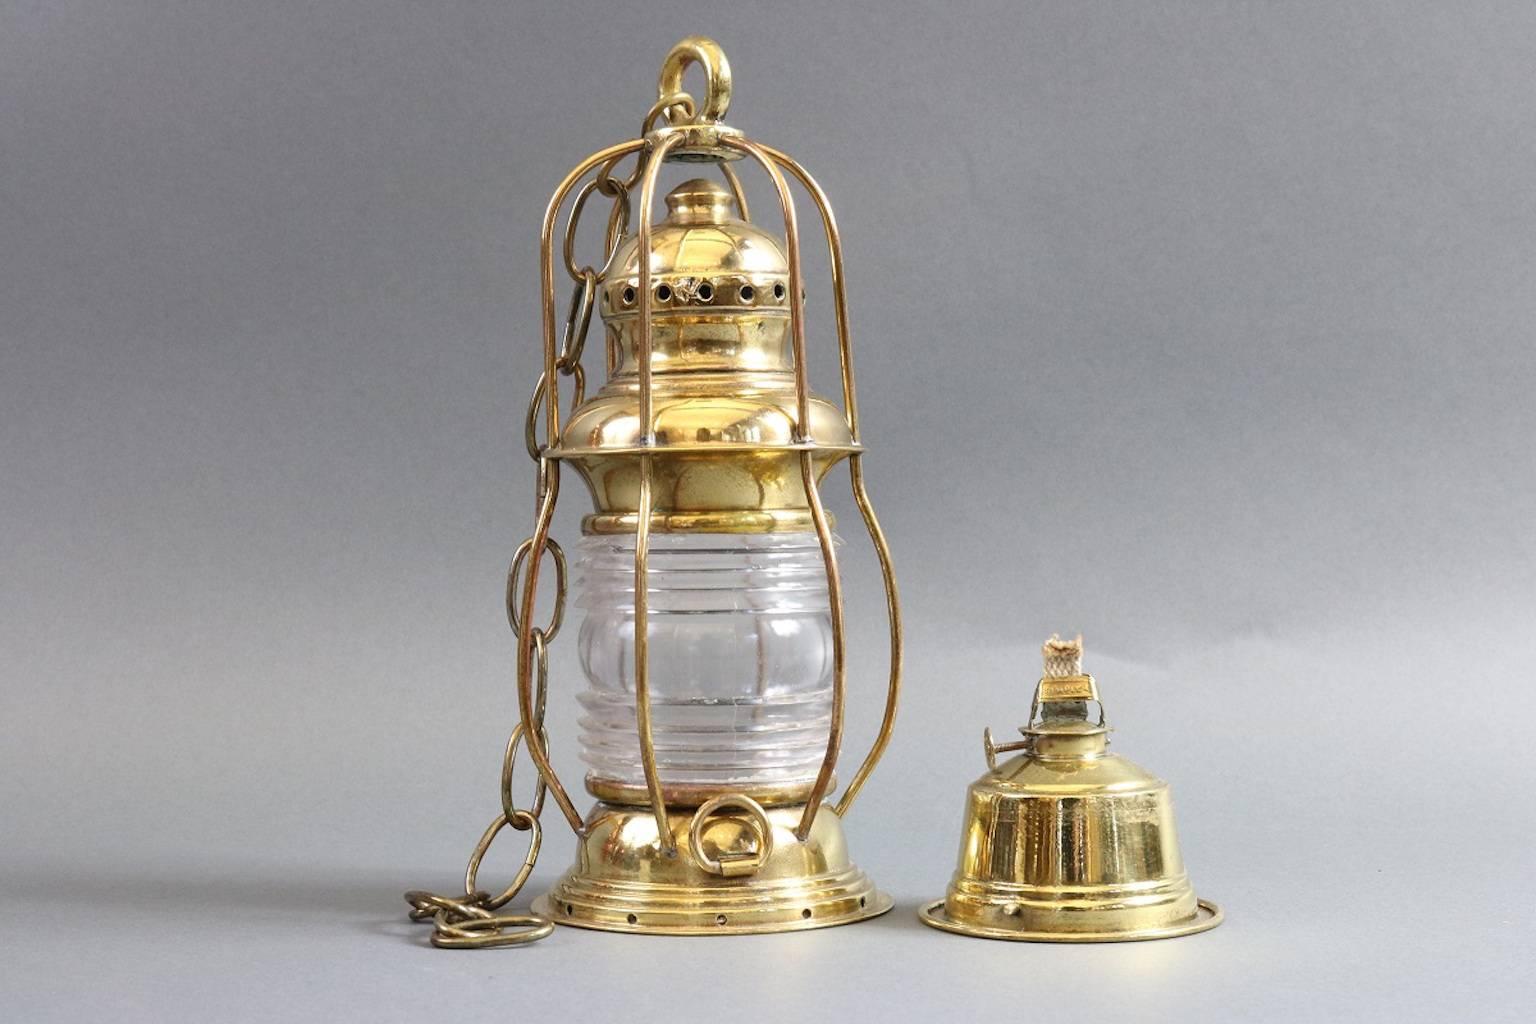 Solid brass ship's anchor lantern, small in size. Fresnel glass, with chip in rib. Dimensions: 5.5" diameter x 11" height.